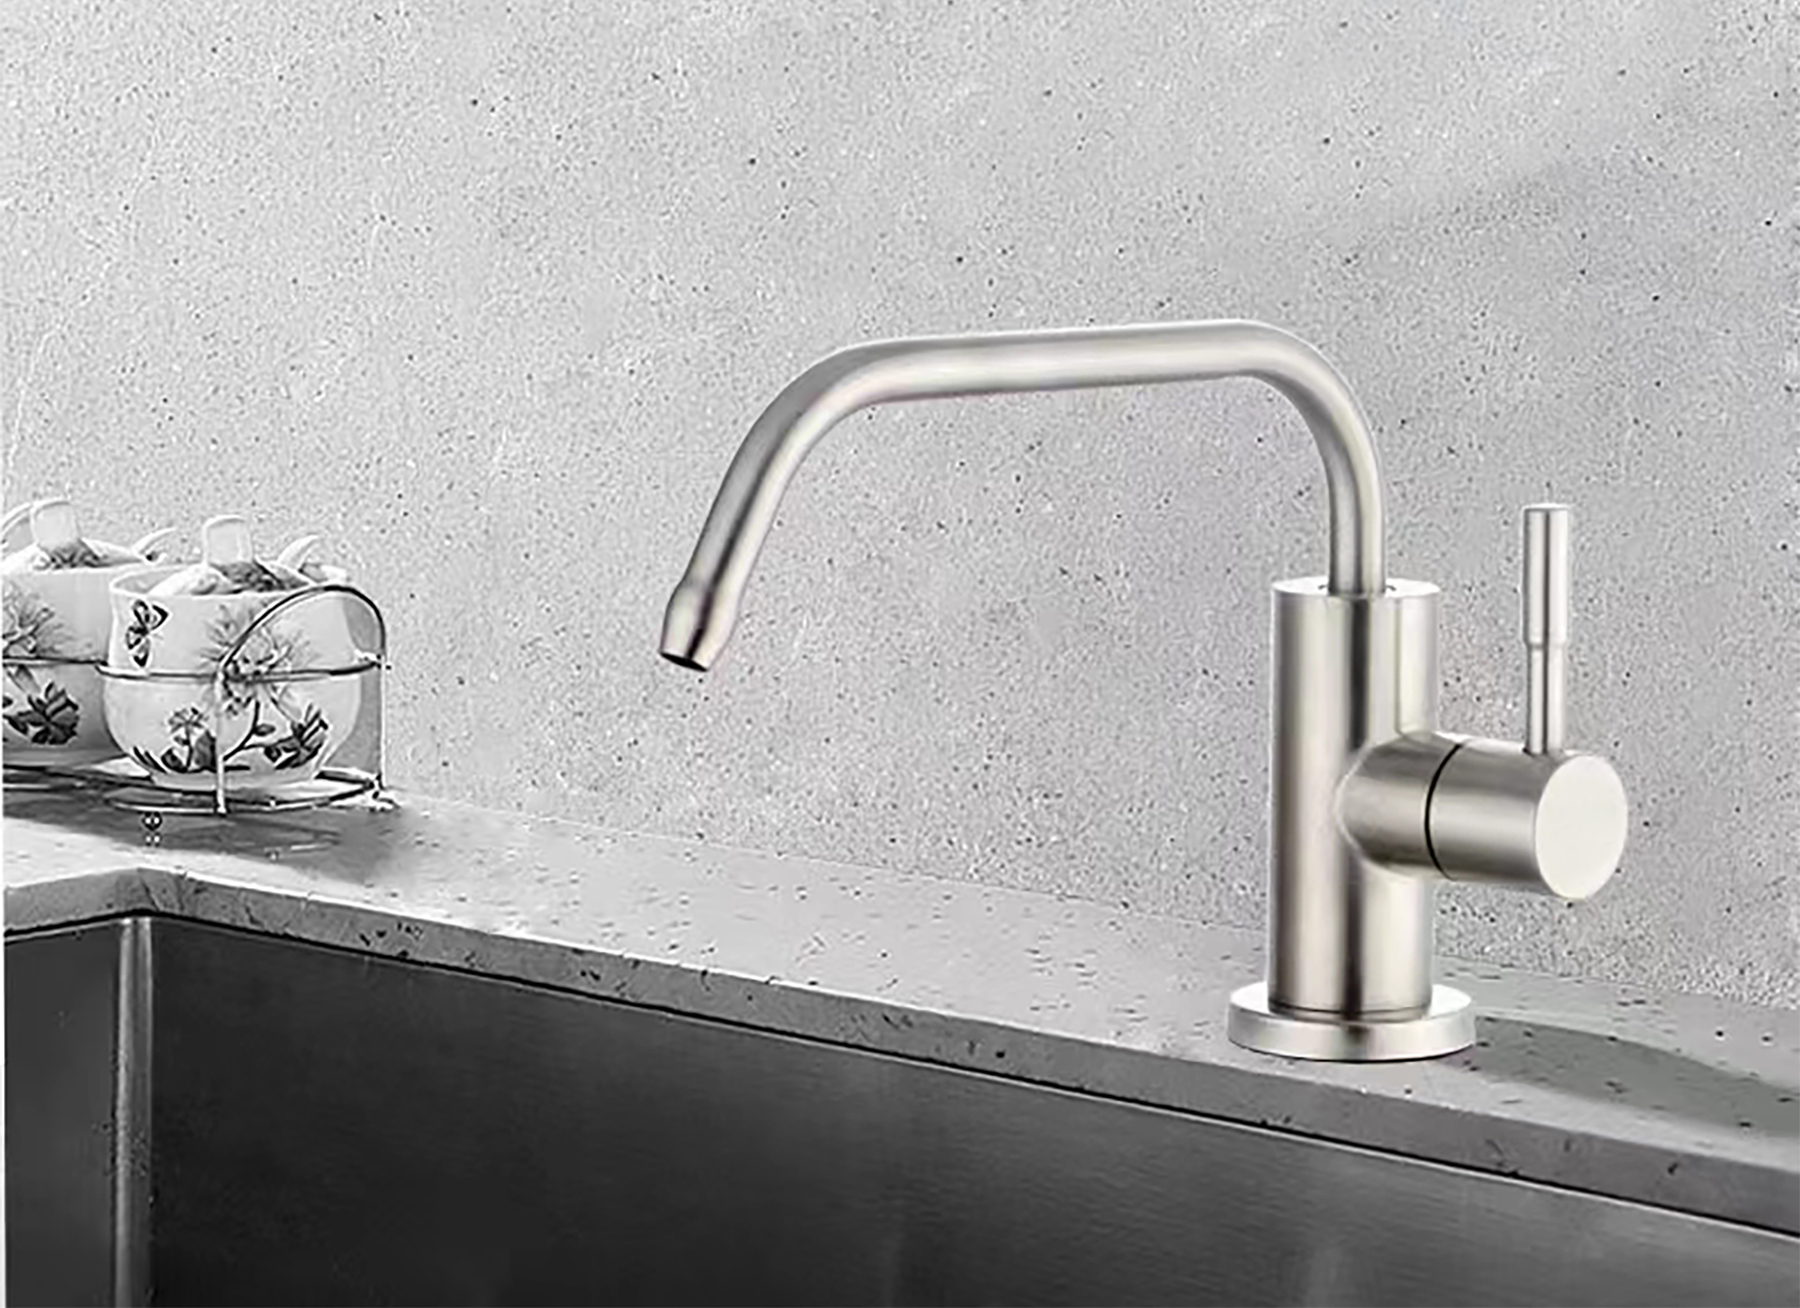 Stainless steel water purifier faucet with raised water pipe11